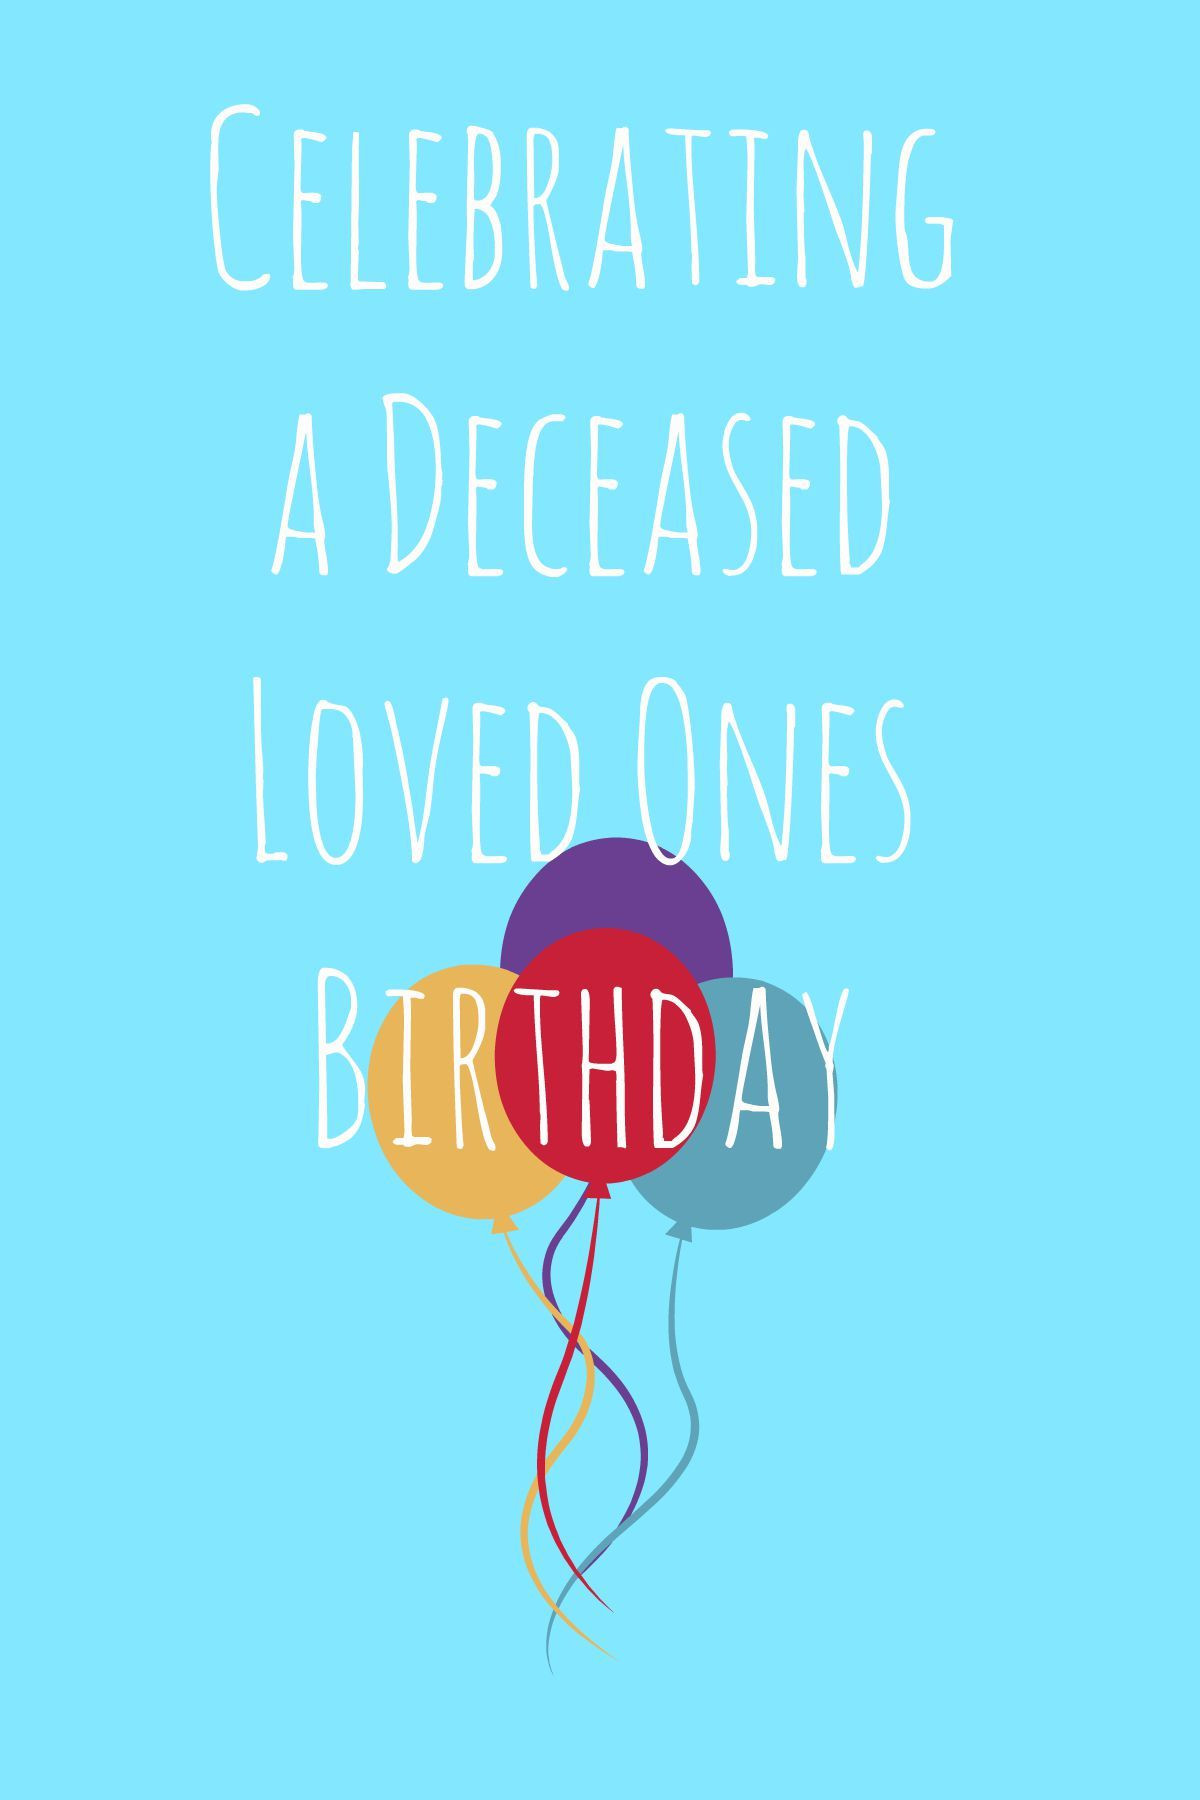 Deceased Birthday Quotes
 And Many More Celebrating a Deceased Loved e s Birthday